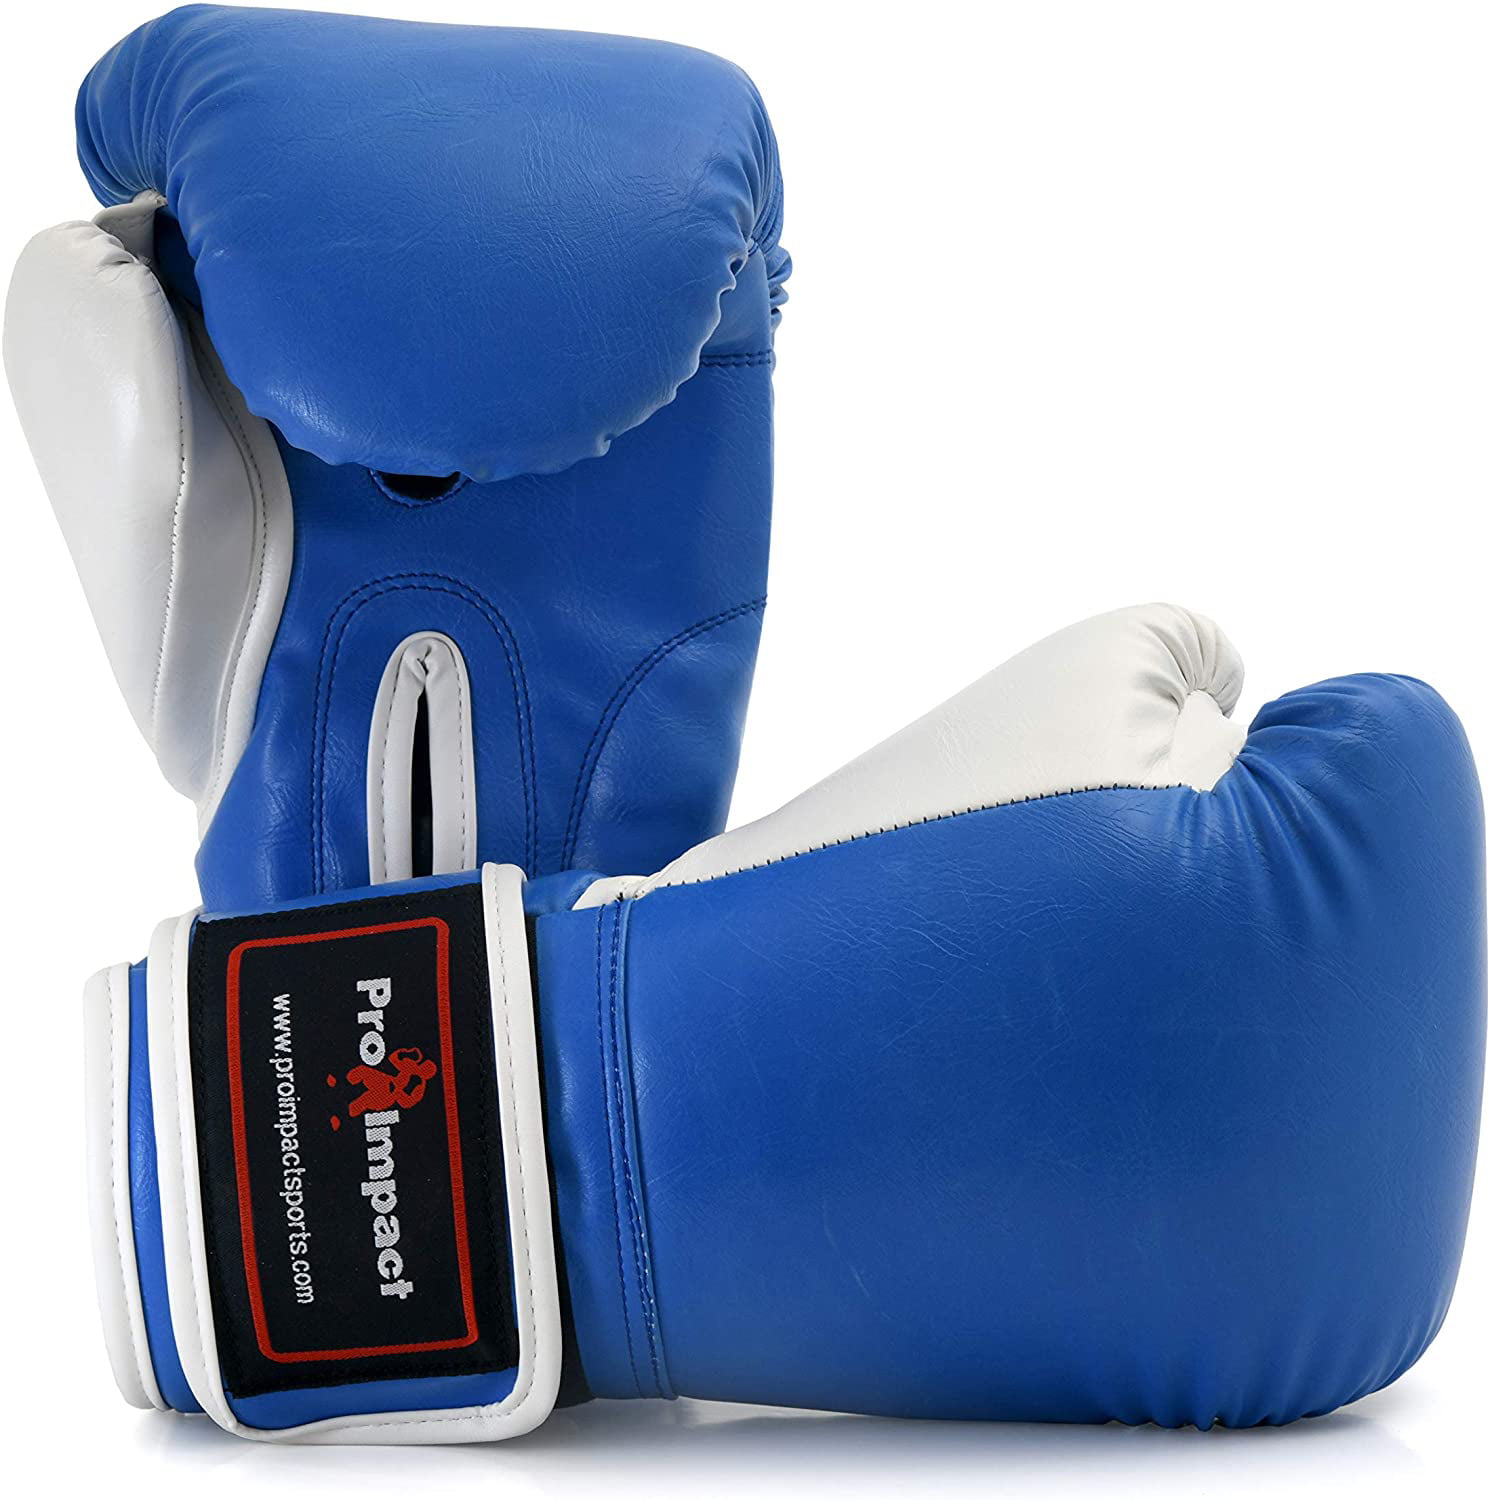 Pro Impact Boxing Gloves Durable Knuckle Protection w/Wrist Support for Boxing MMA Muay Thai or Fighting Sports Training/Sparring Use